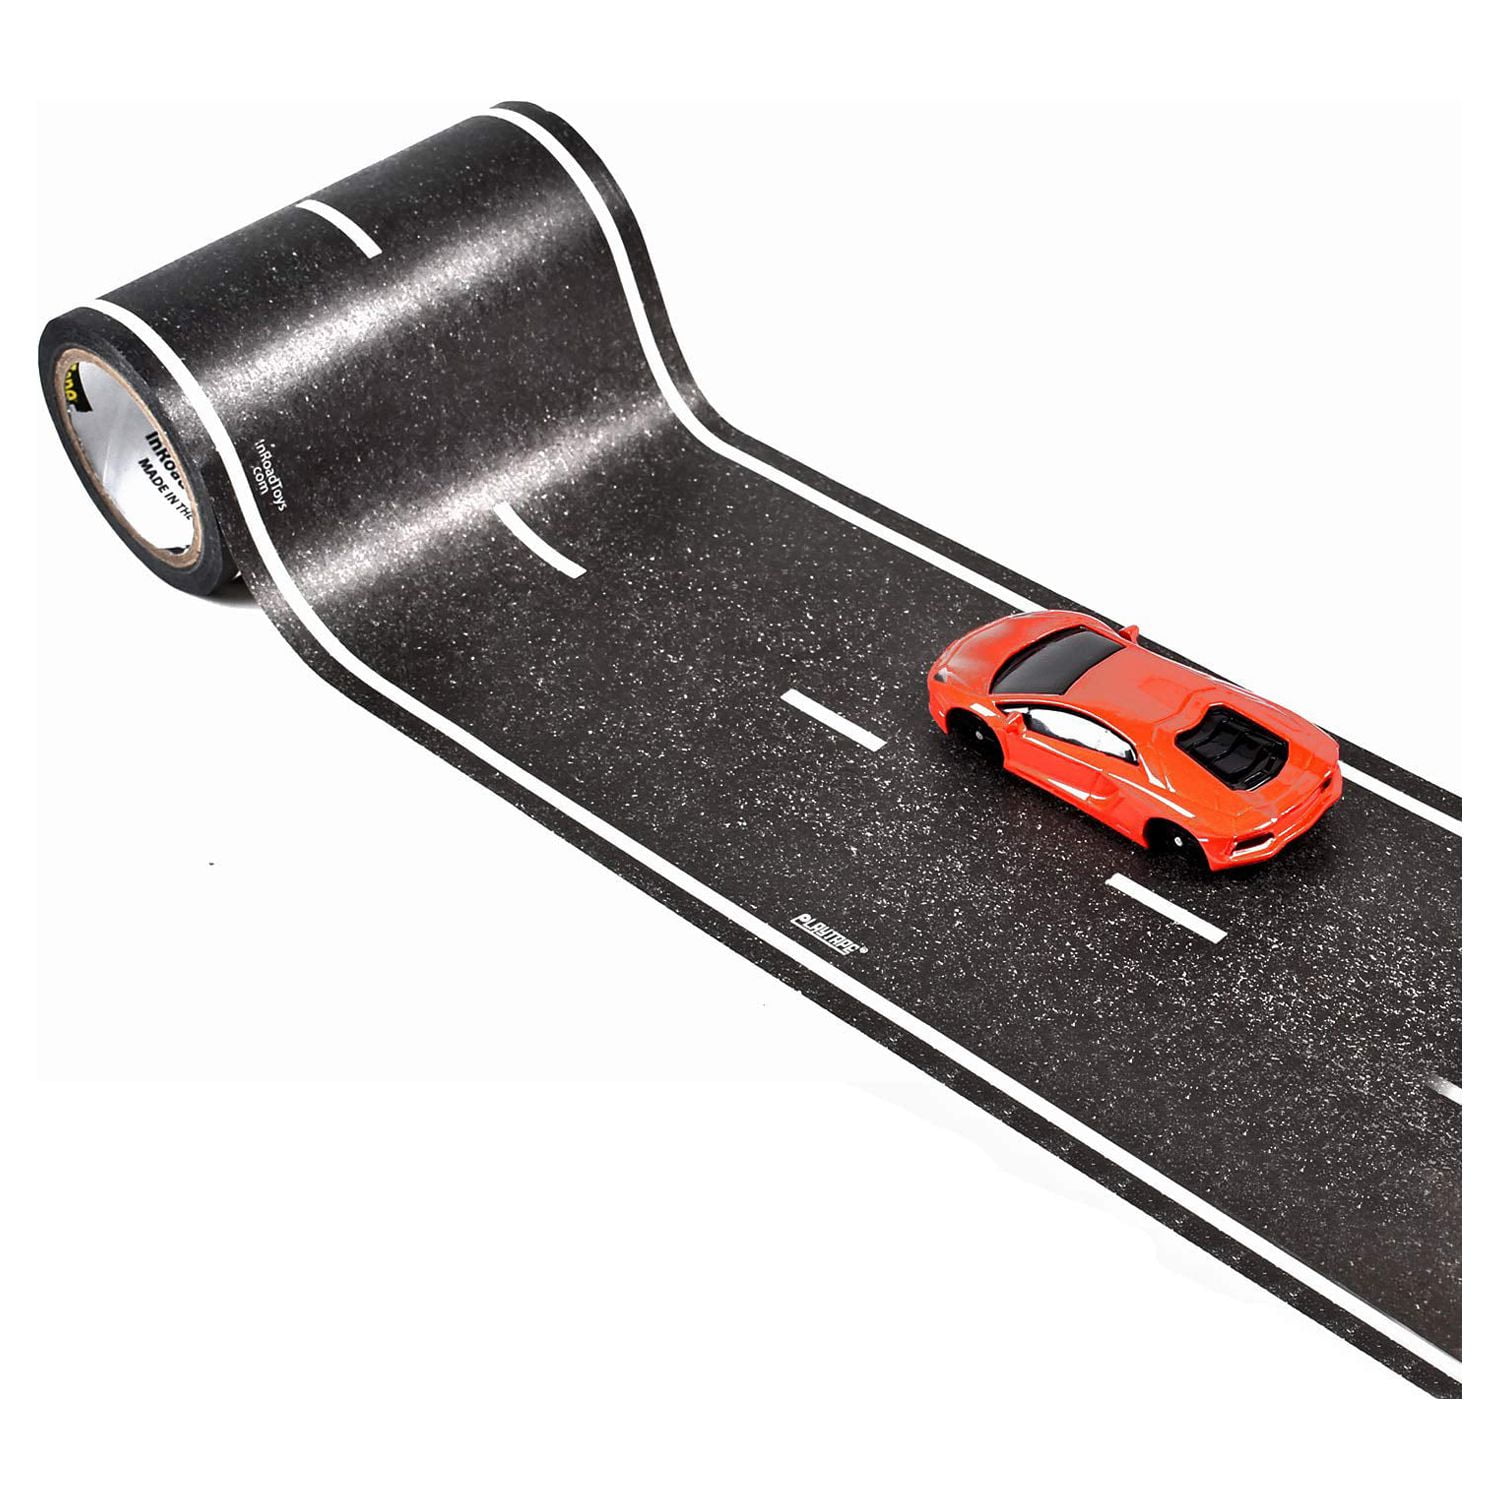 PlayTape Road Tape for Toy Cars - Sticks to Flat Surfaces, No Residue;  8-Pack of 30 ft. x 2 in. Black Road